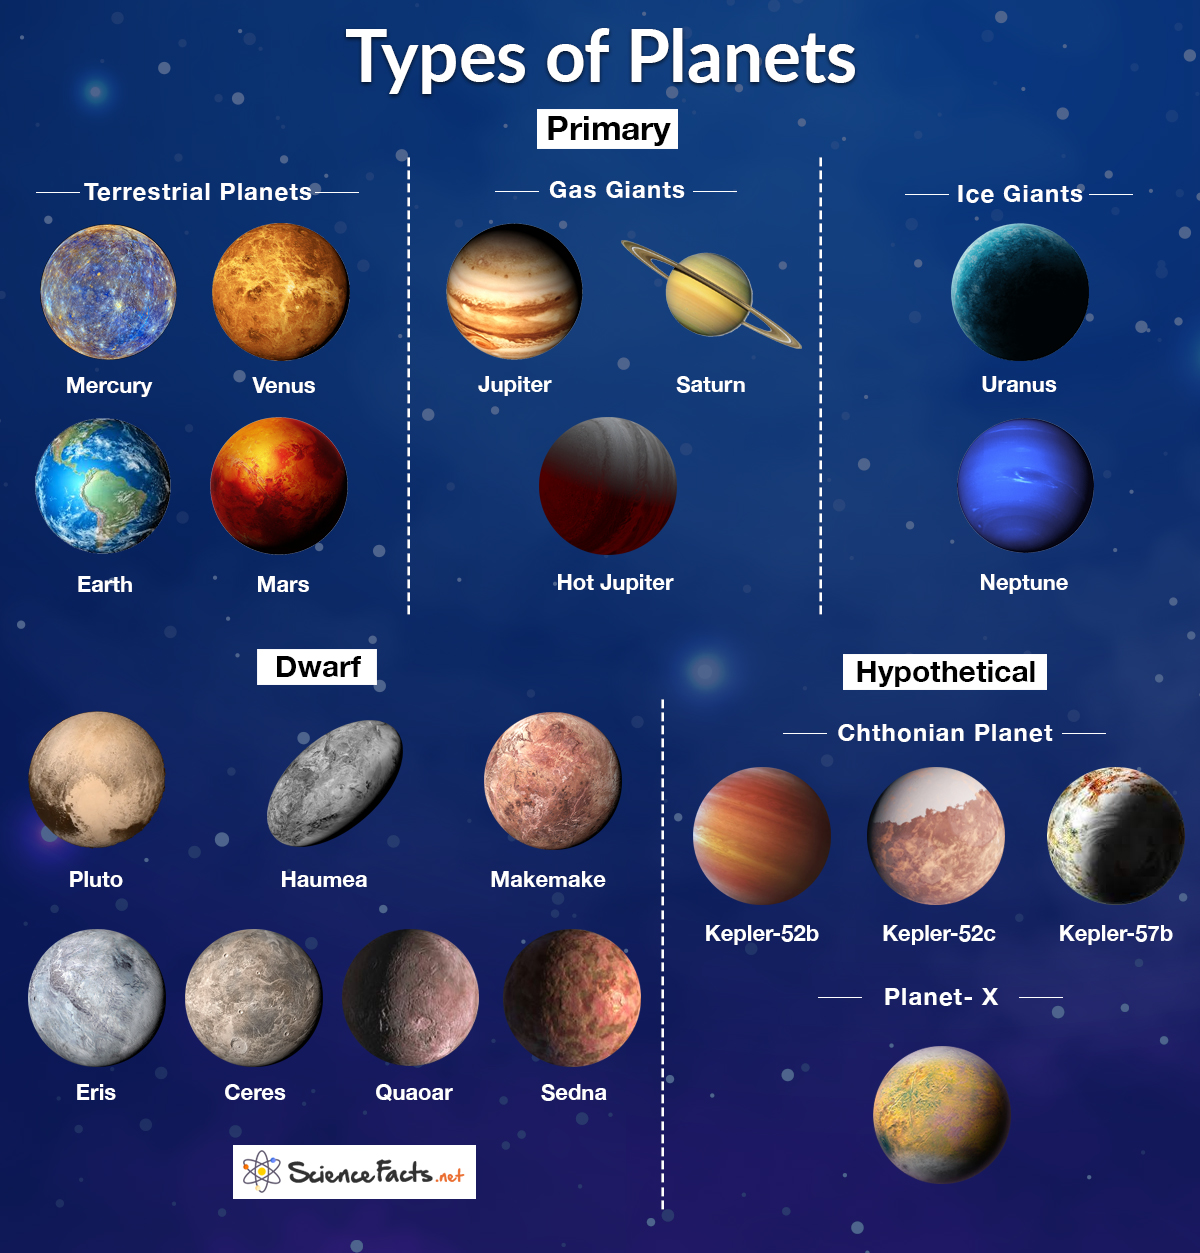 https://www.sciencefacts.net/wp-content/uploads/2019/12/Types-of-Planets.jpg